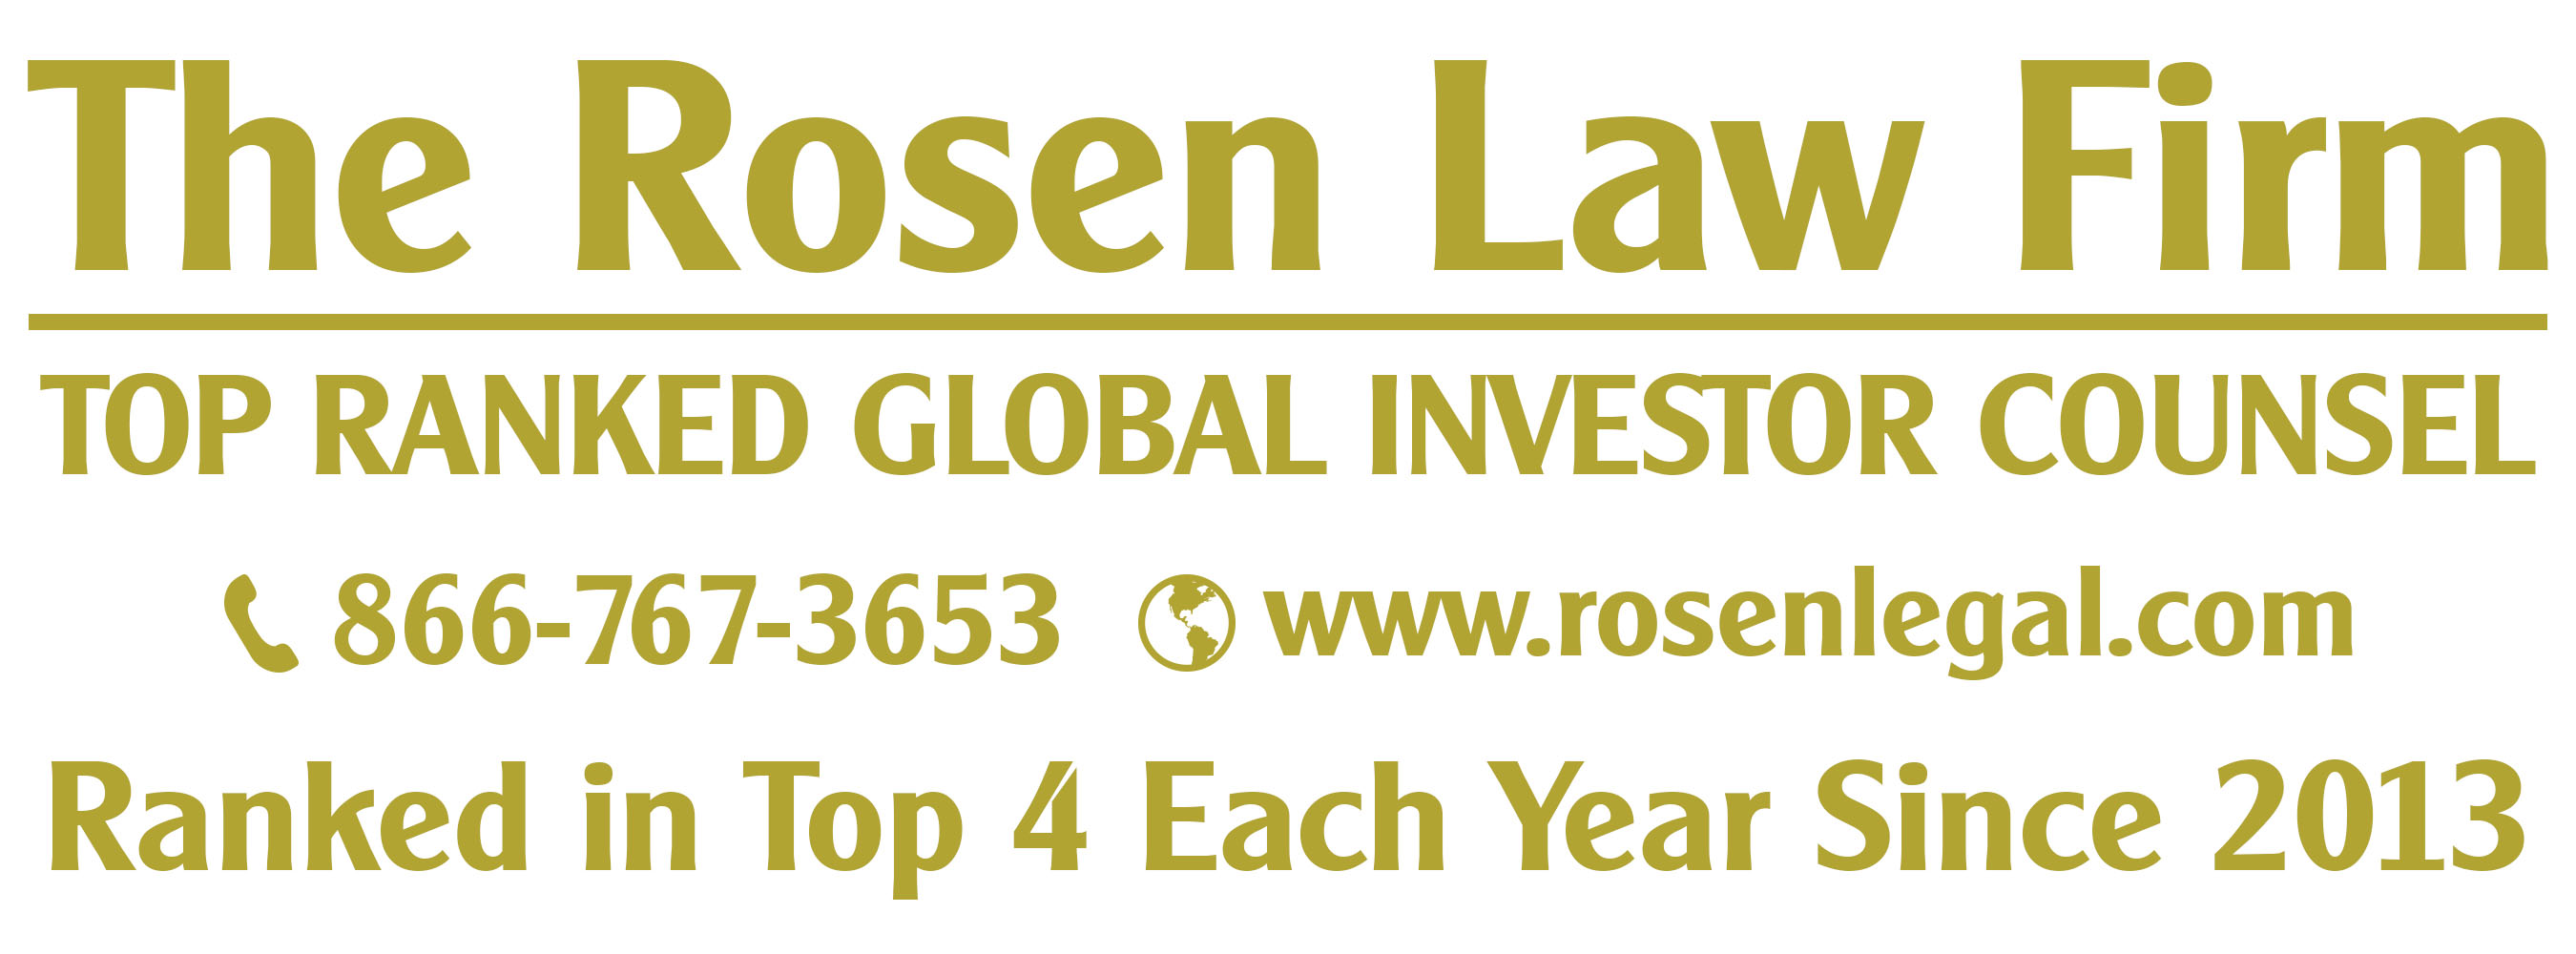 Rosen Law Firm PA, Saturday October 29, 2022 Image of press release